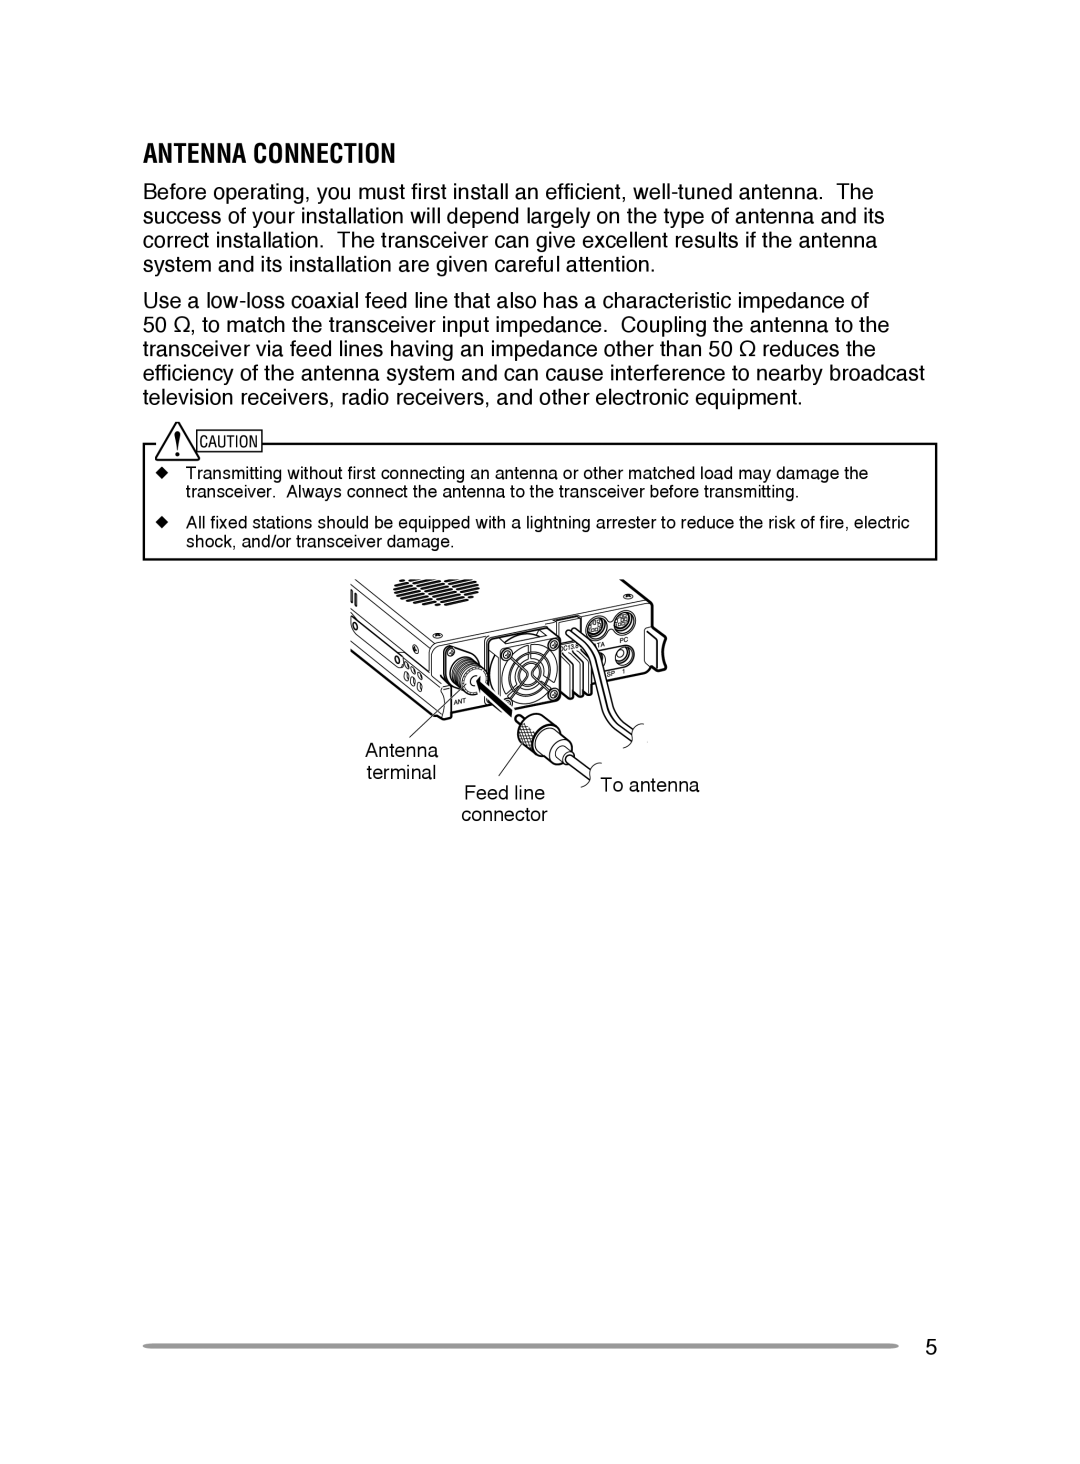 Kenwood TM-V71A, TM-V71E instruction manual Antenna Connection, terminal, Feed line, connector 